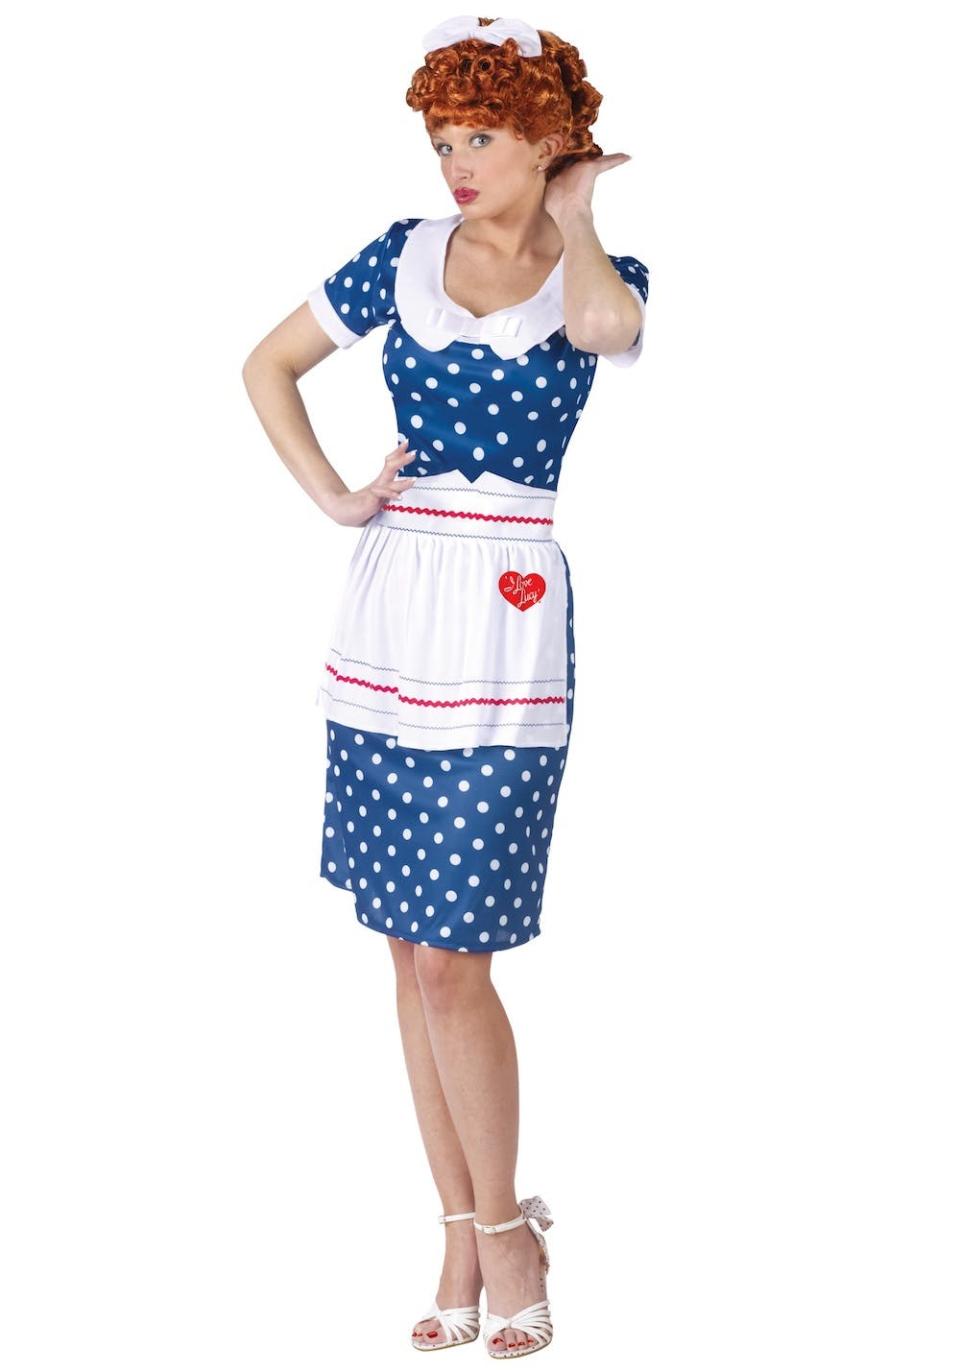 Lucille Ball Costume